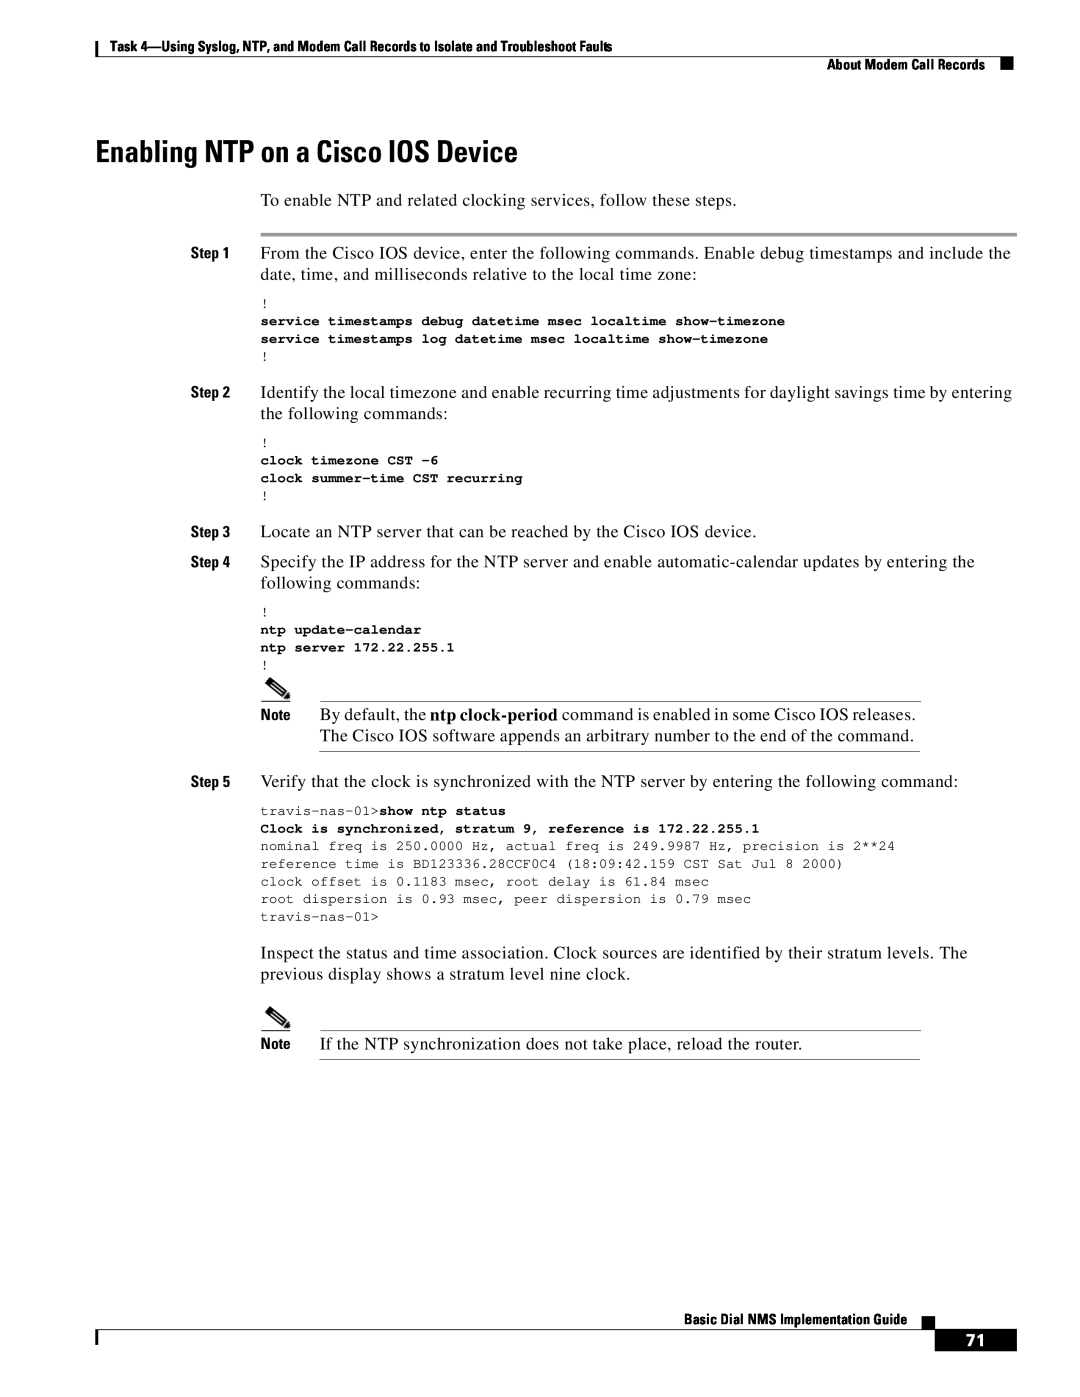 Cisco Systems Dial NMS manual Enabling NTP on a Cisco IOS Device 